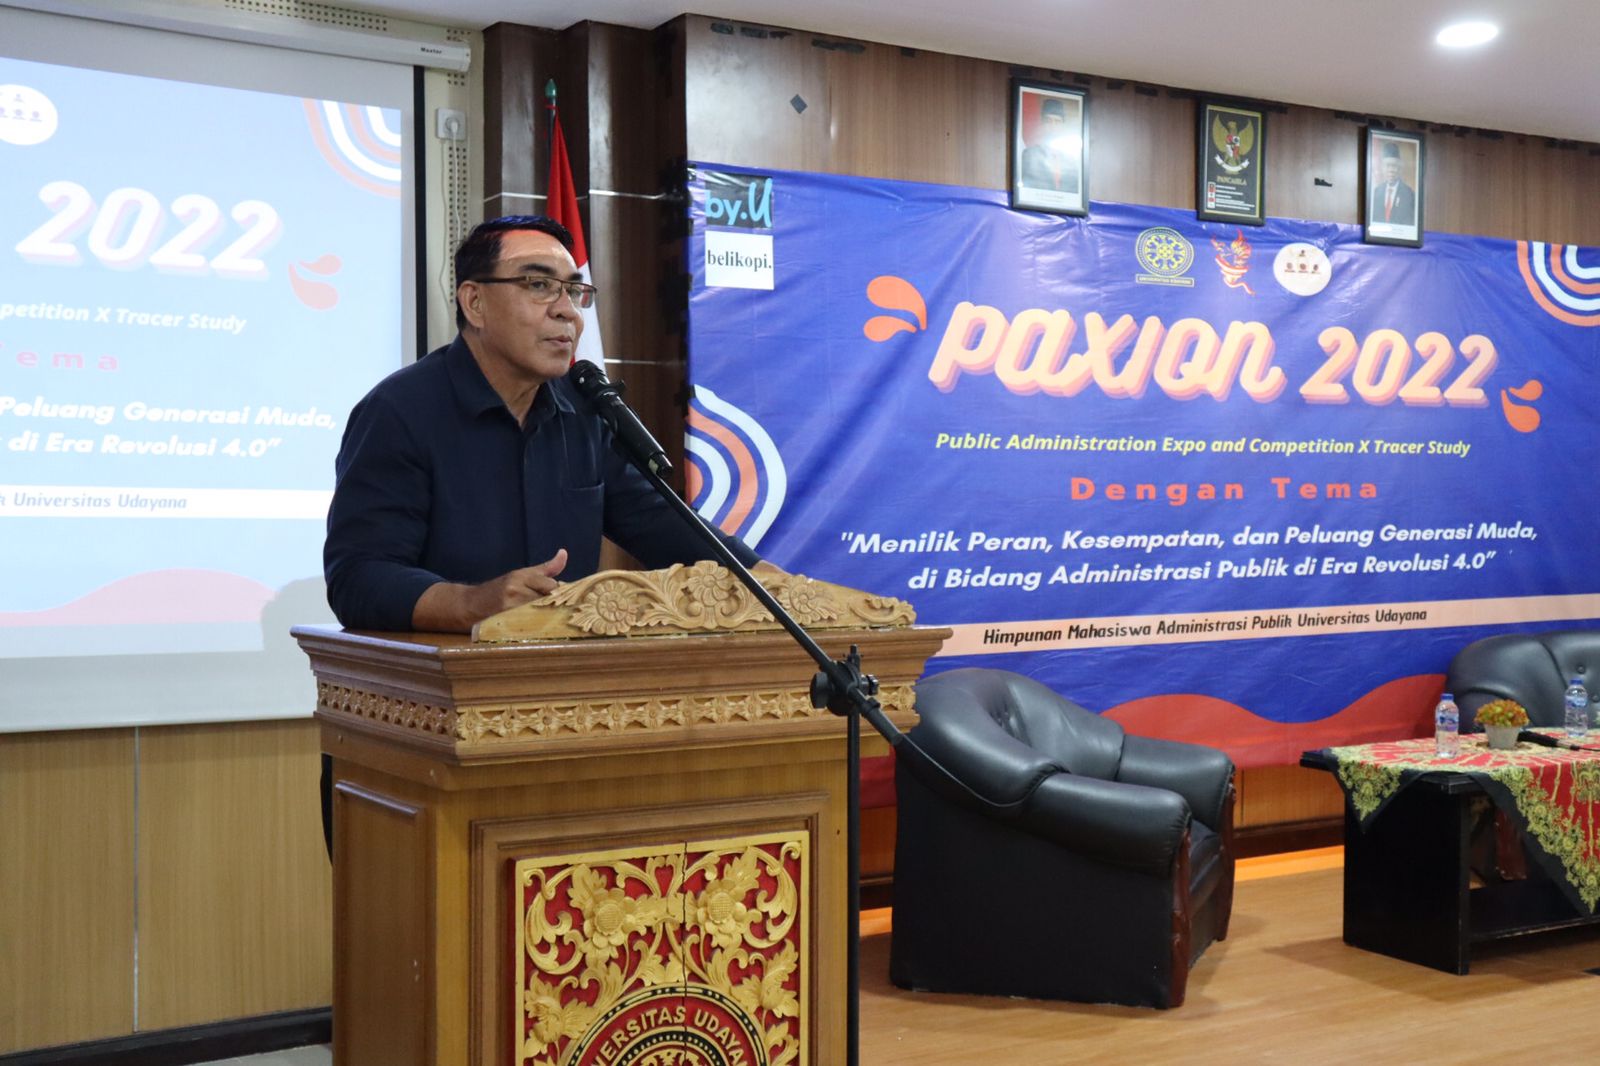 INTRODUCING PUBLIC ADMINISTRATION, HIMA AP FISIP UNUD SUCCESSFULLY HAS PAXION x TRACER STUDY